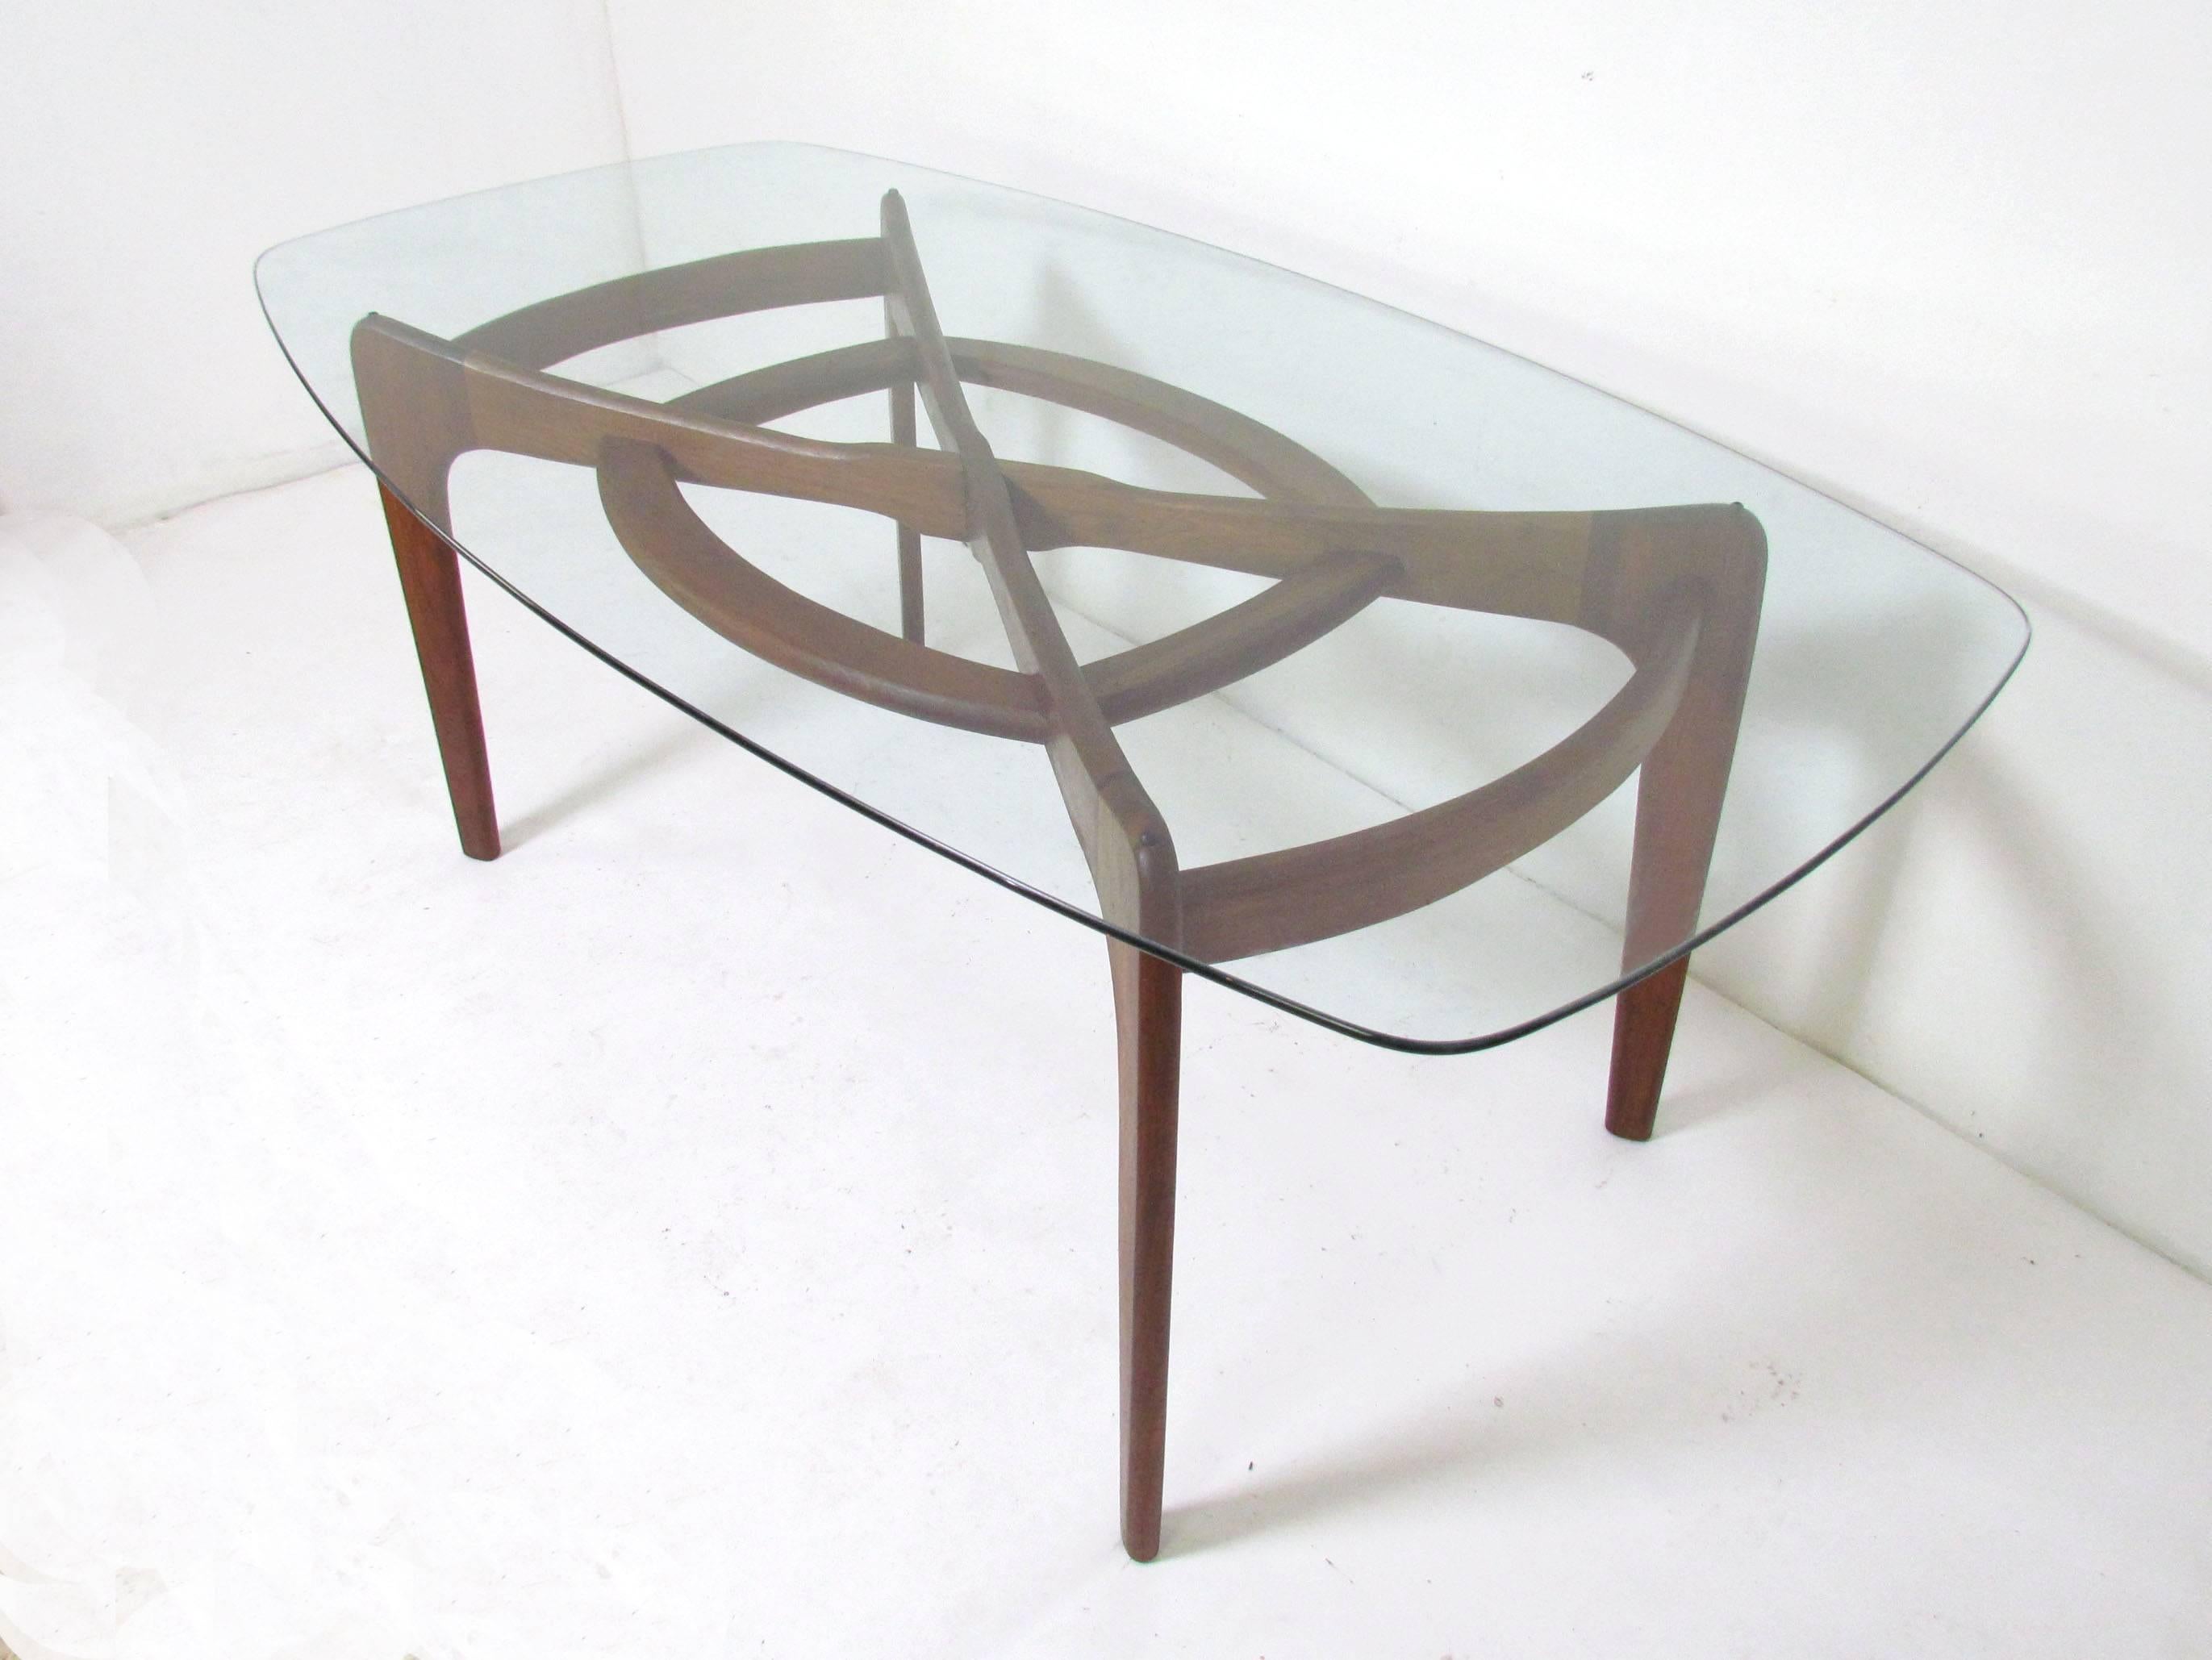 Mid-Century Modern sculptural elongated "compass" dining table in solid walnut by Adrian Pearsall for Craft Associates, circa 1960s.